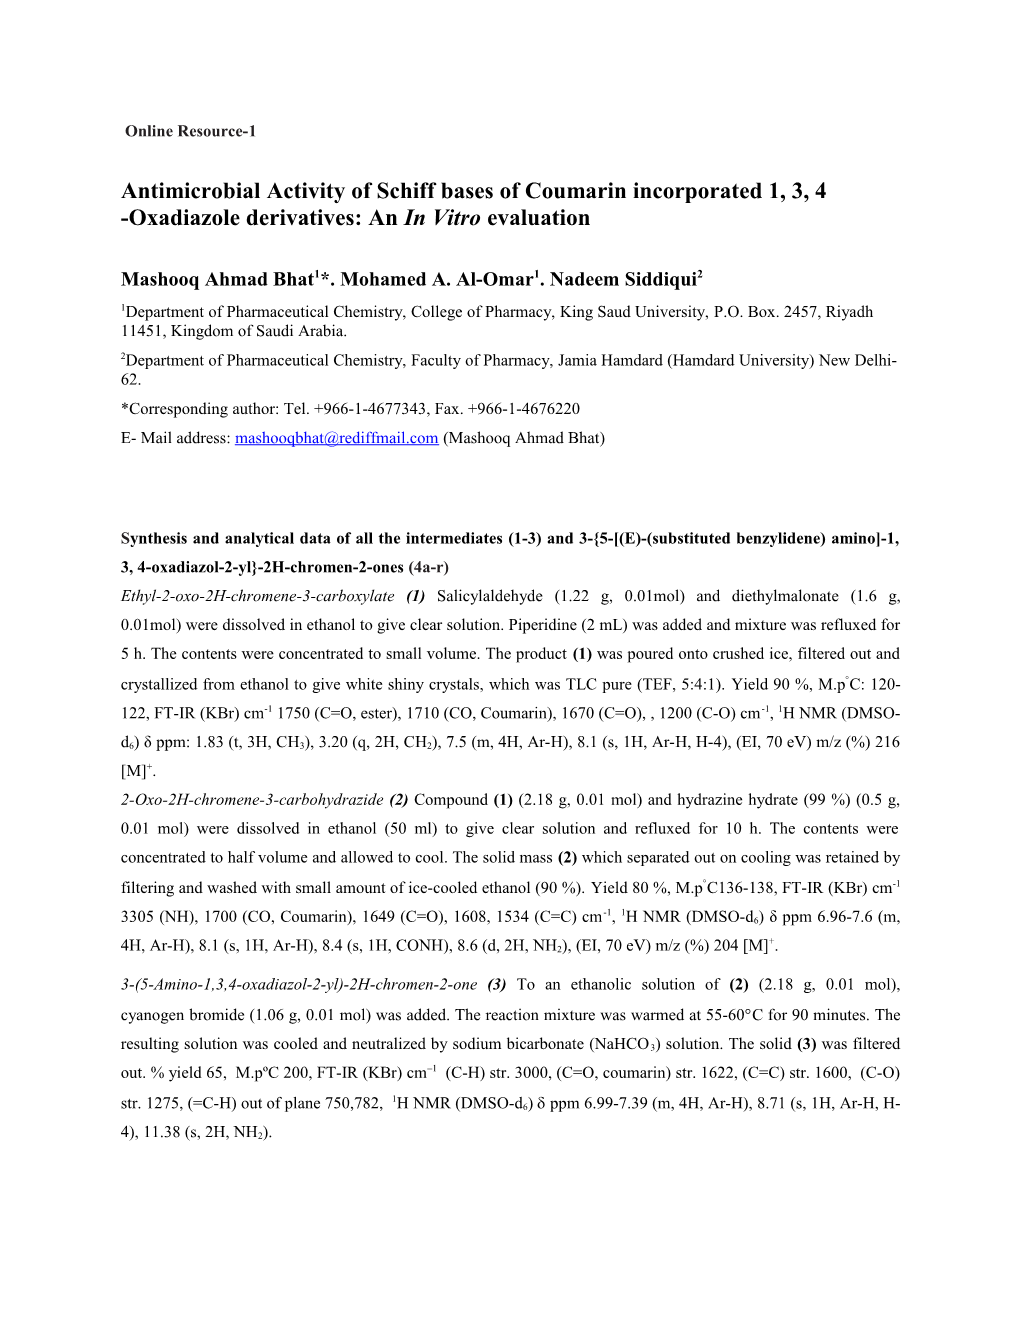 Antimicrobial Activity of Schiff Bases of Coumarin Incorporated 1, 3, 4 -Oxadiazole